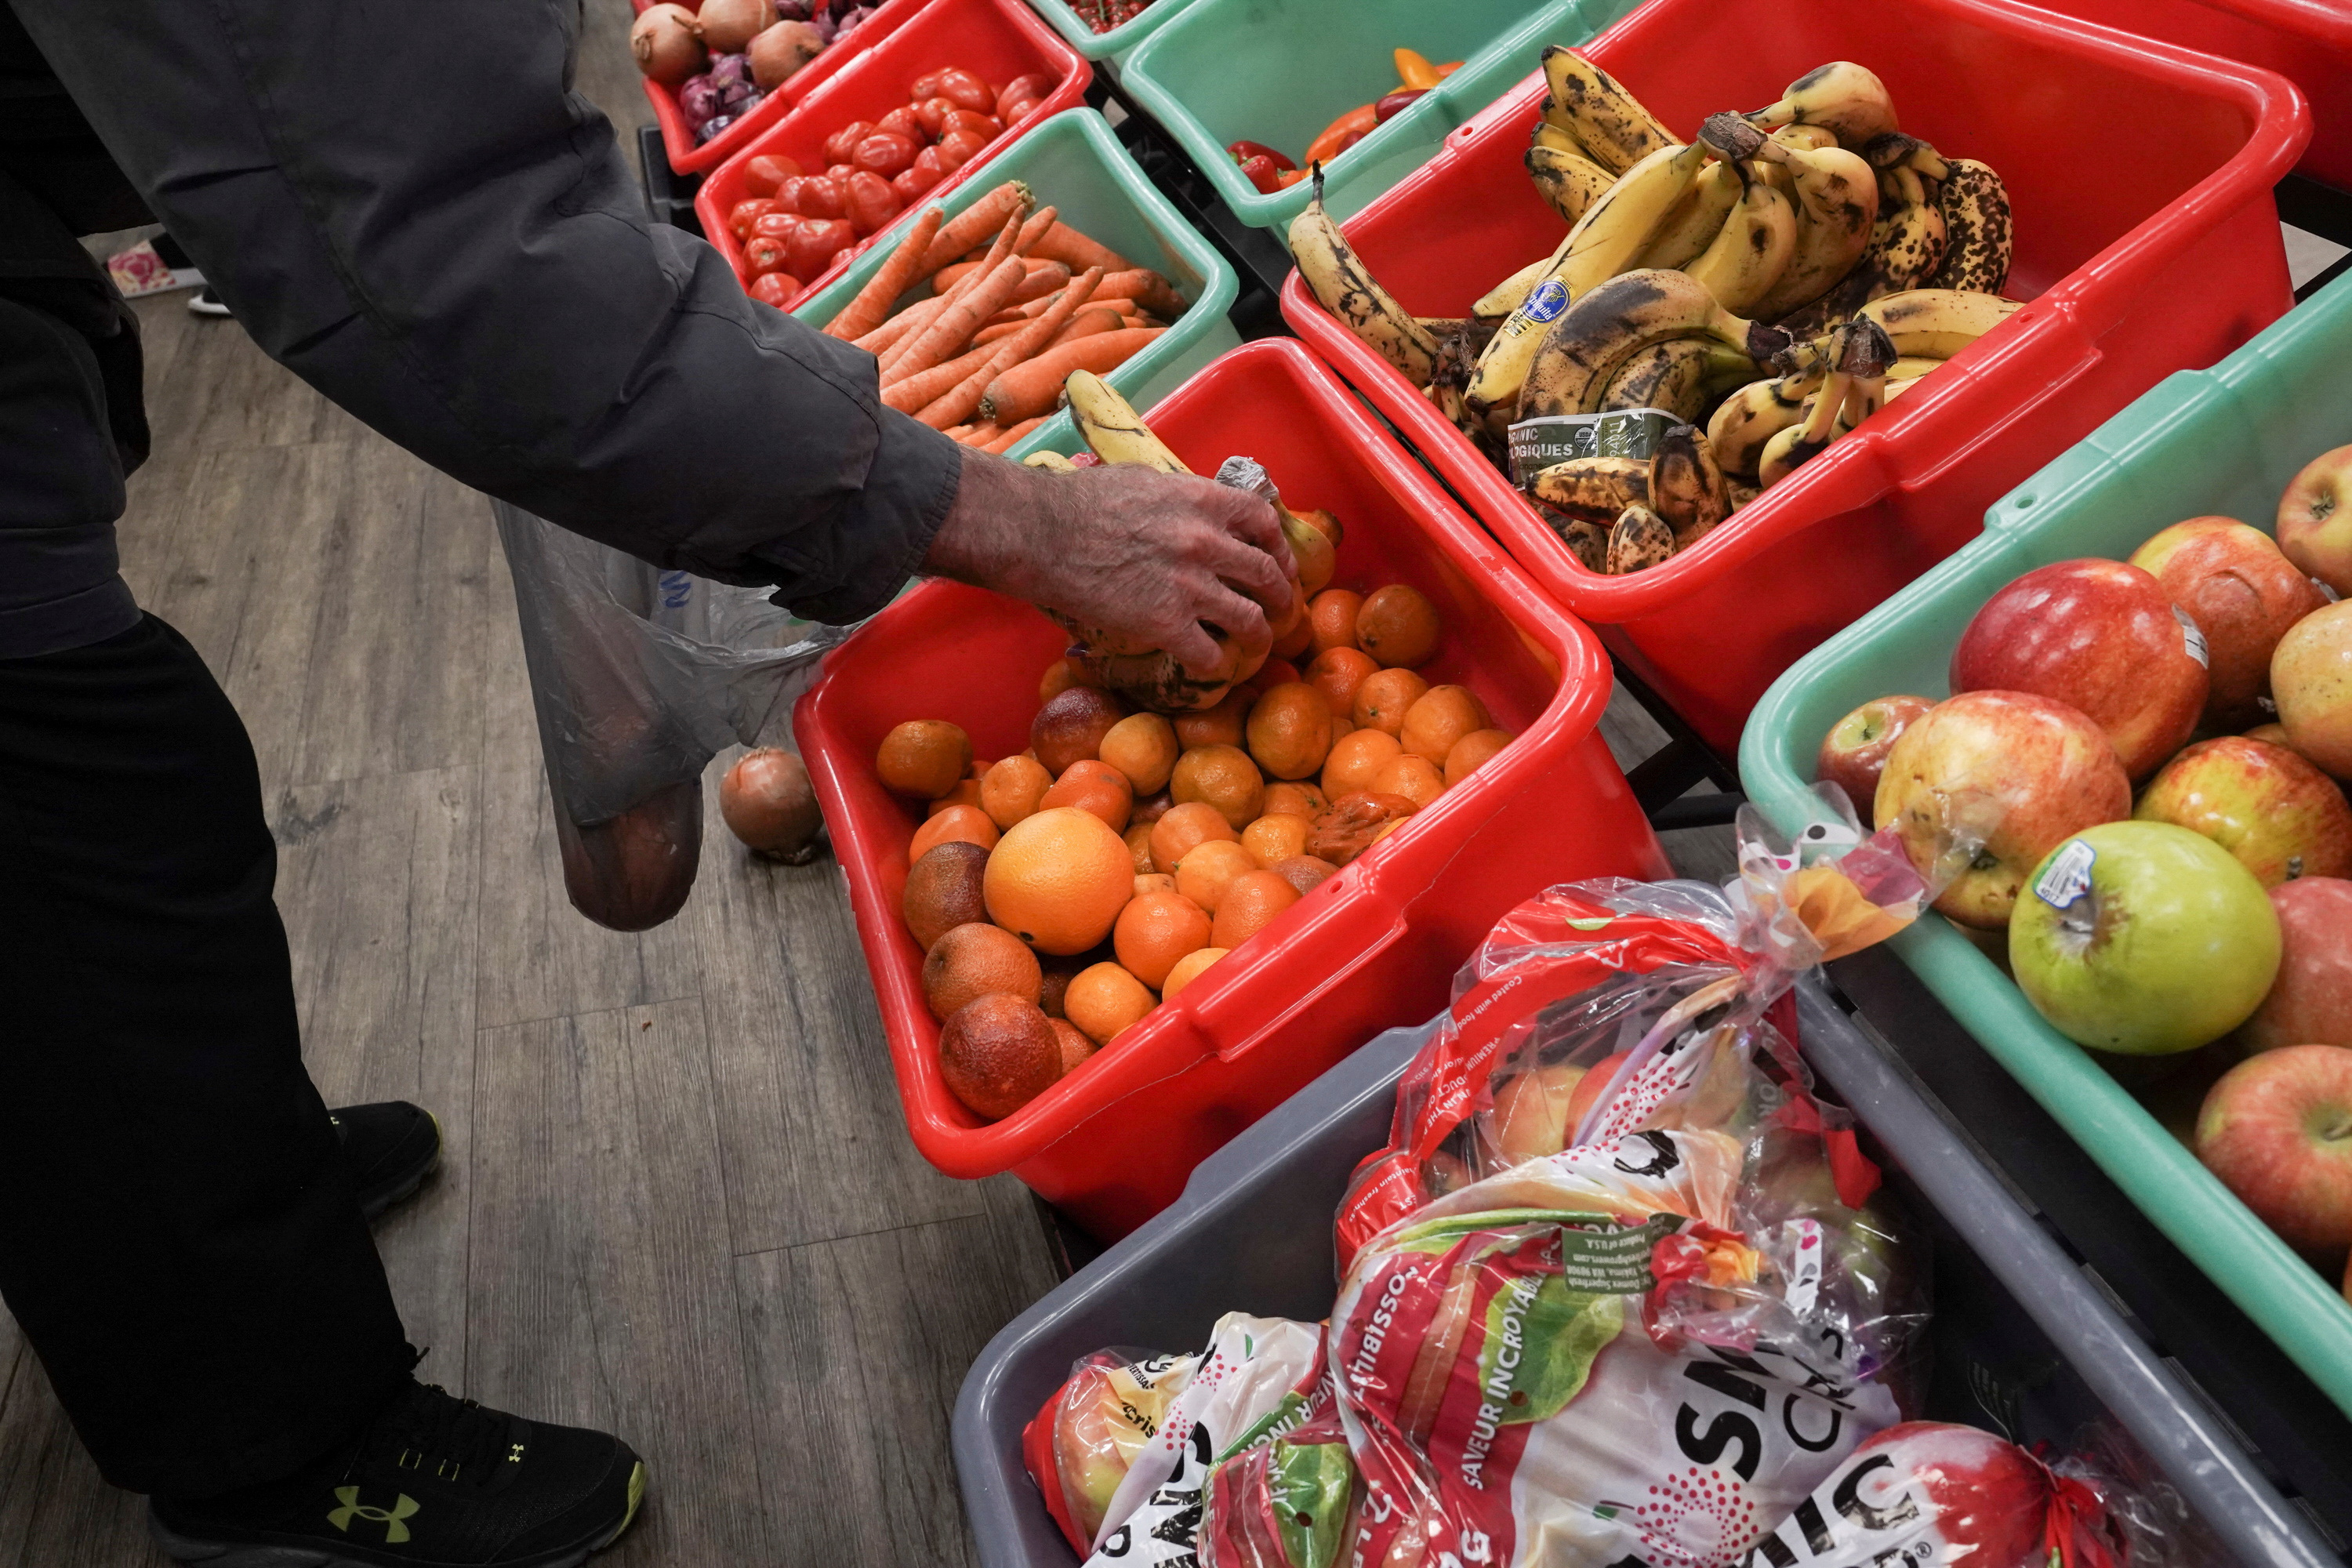 A community member grabs a piece of fruit at The Community Assistance Center food pantry, in Atlanta